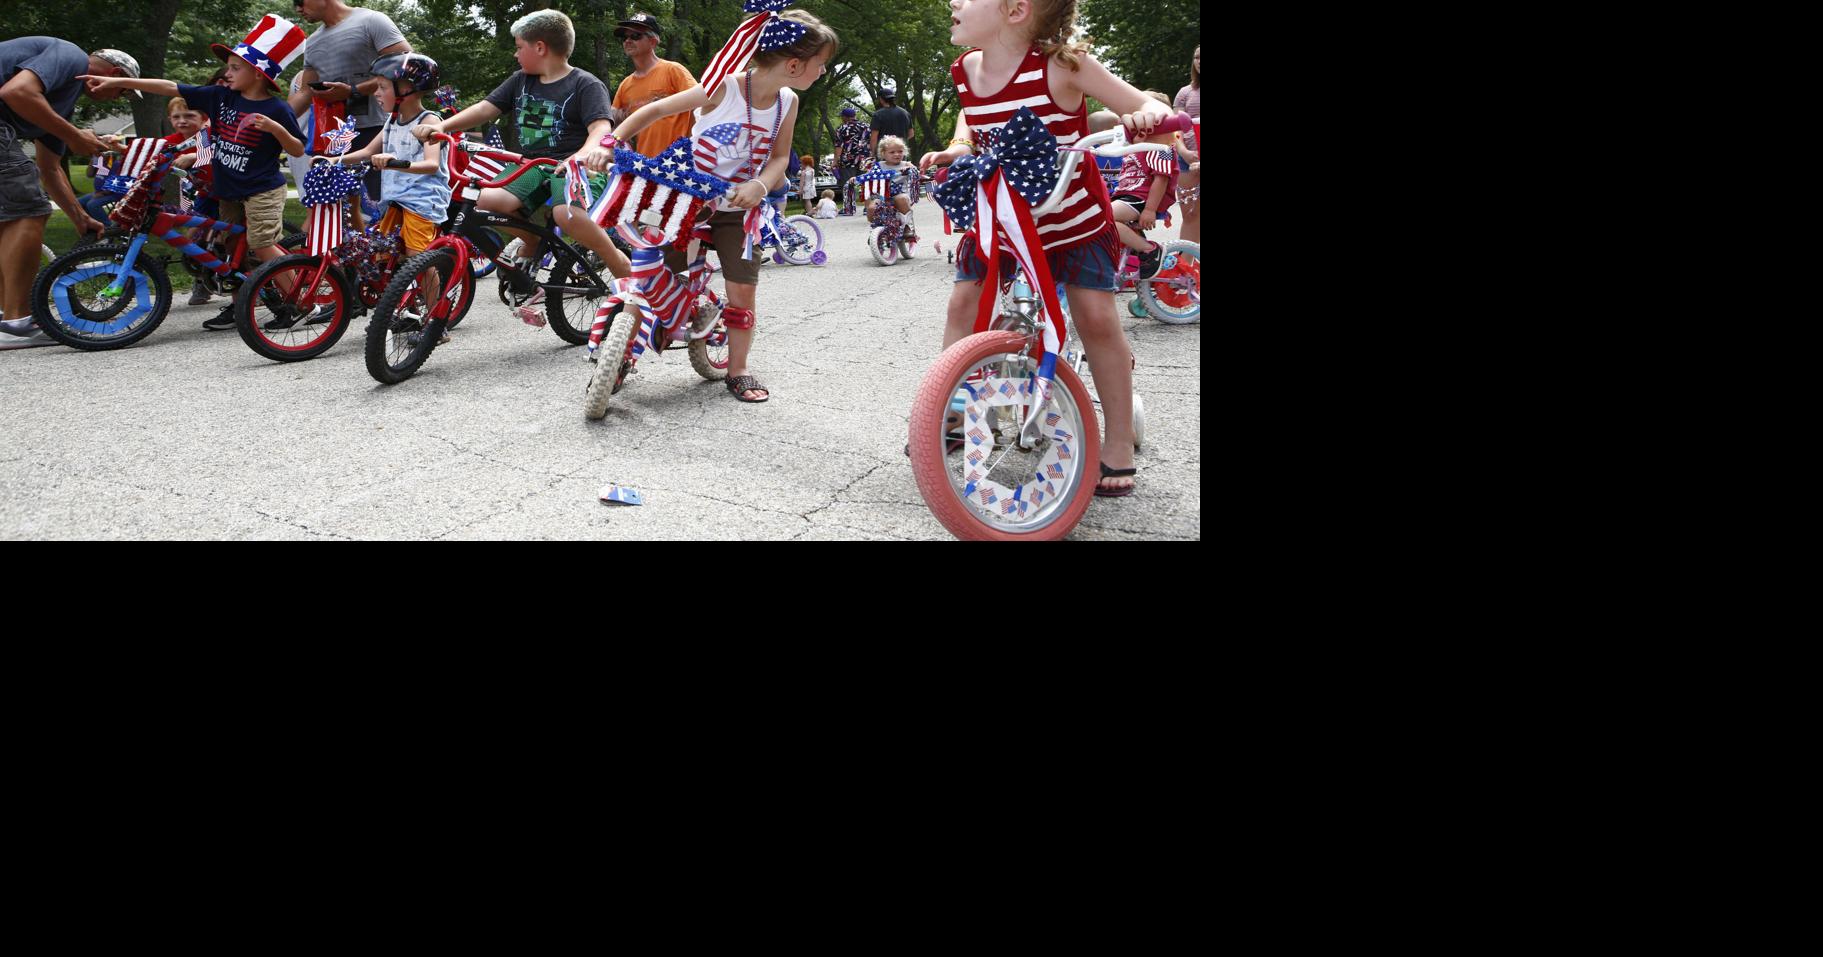 Children race bikes during Randolph Fourth of July parade Local News